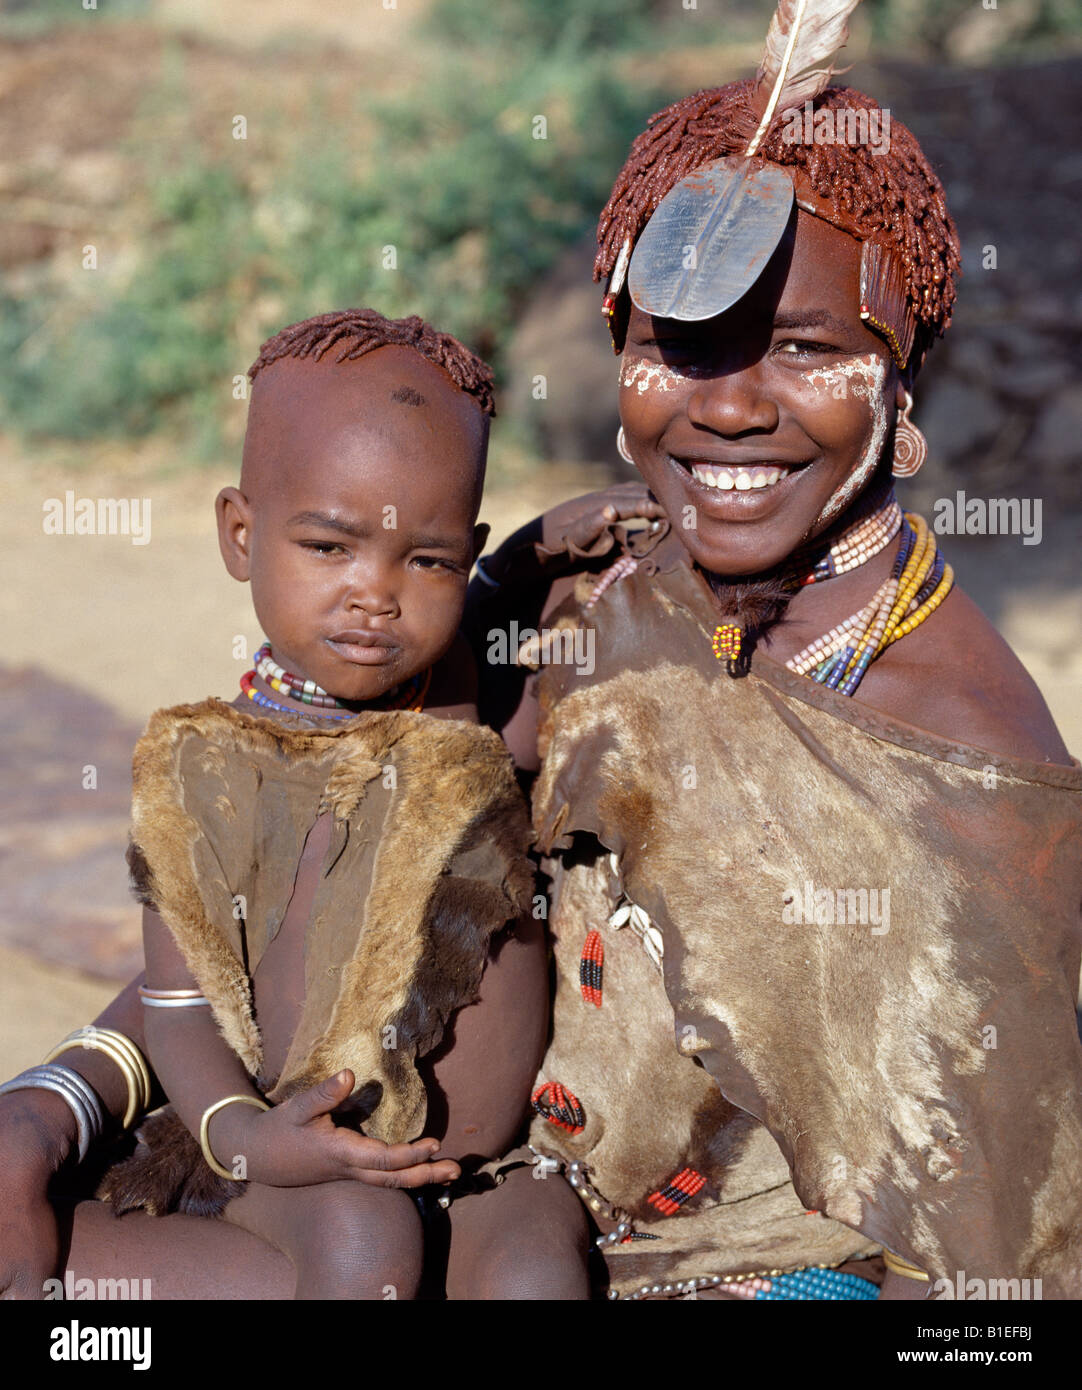 A happy Hamar girl with her young sister on her lap.The Hamar of Southwest Ethiopia are semi-nomadic pastoralists. Stock Photo